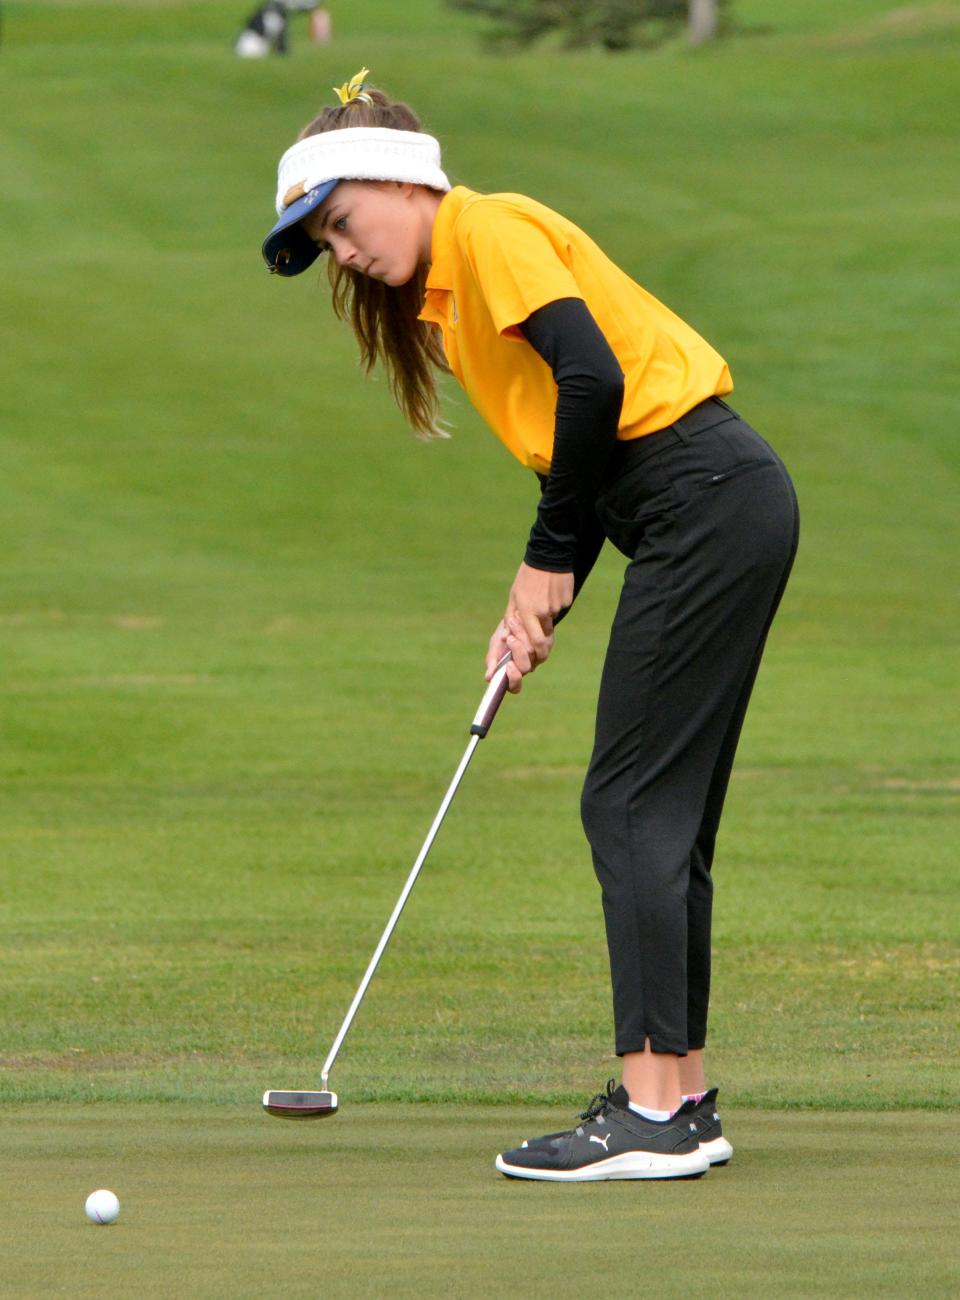 Aberdeen Central's Olivia Braun putts on No. 1 Yellow during the 2022 Watertown Girls Golf Invitational at Cattail Crossing Golf Course.